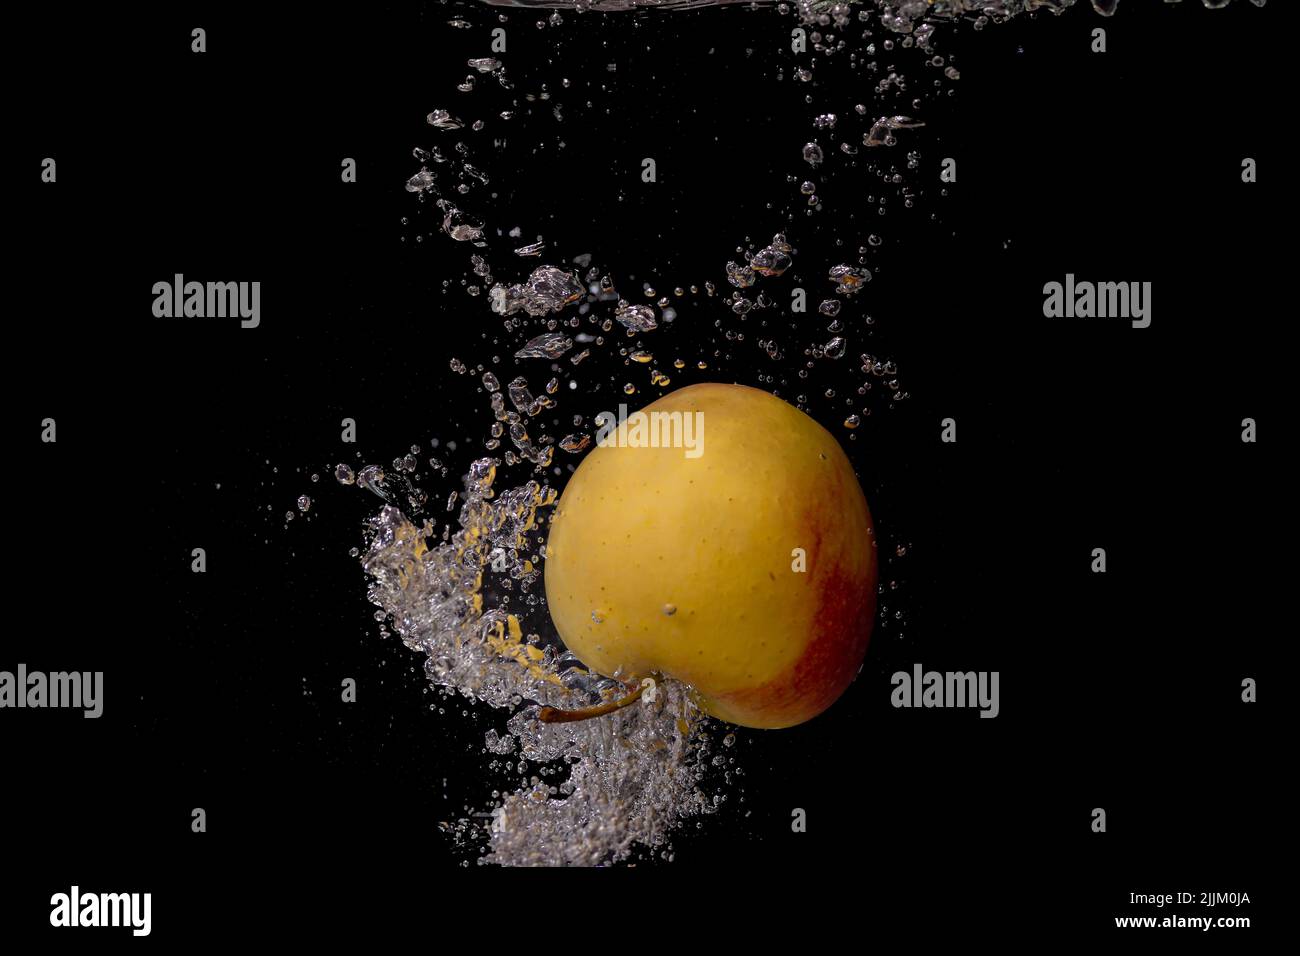 An apple with water splashes on a black background Stock Photo